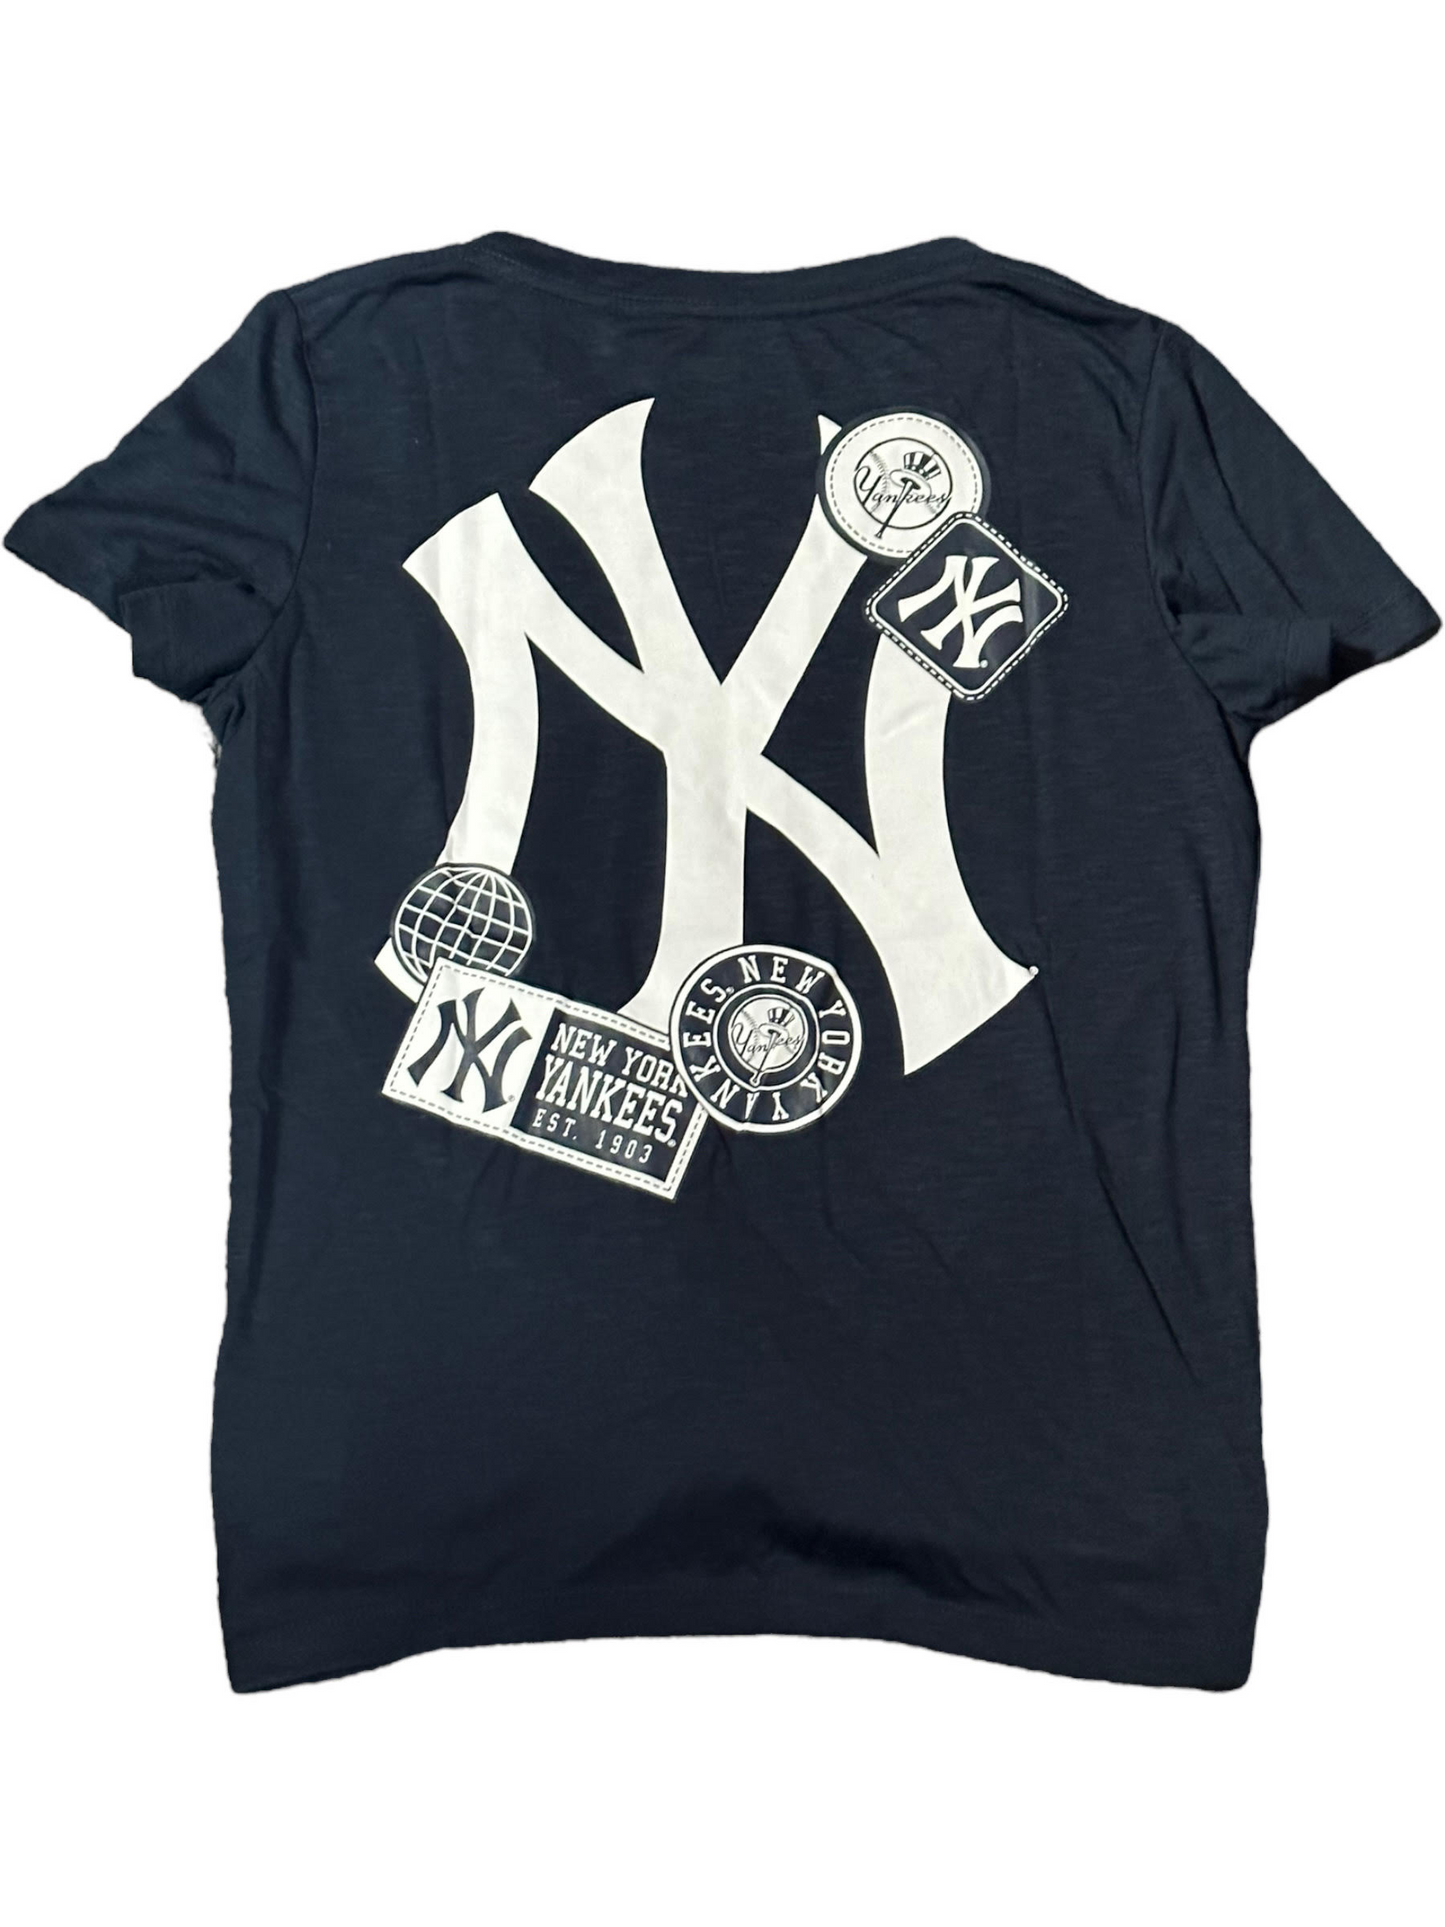 NEW YORK YANKEES WOMEN'S STAMPED FRONT KNOT T-SHIRT